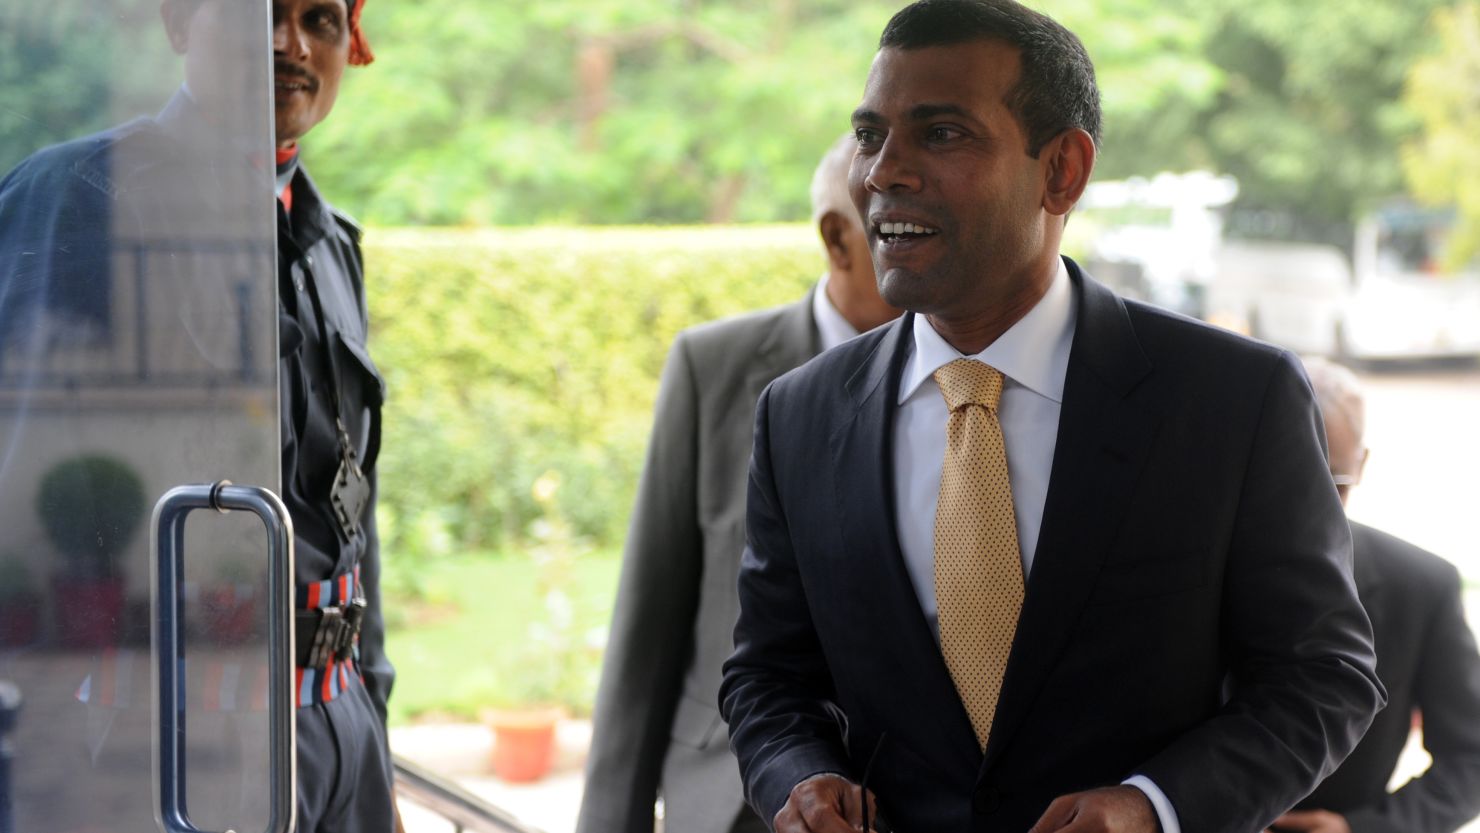 Police in the Maldives arrested the former president Mohamed Nasheed (pictured) on Monday.